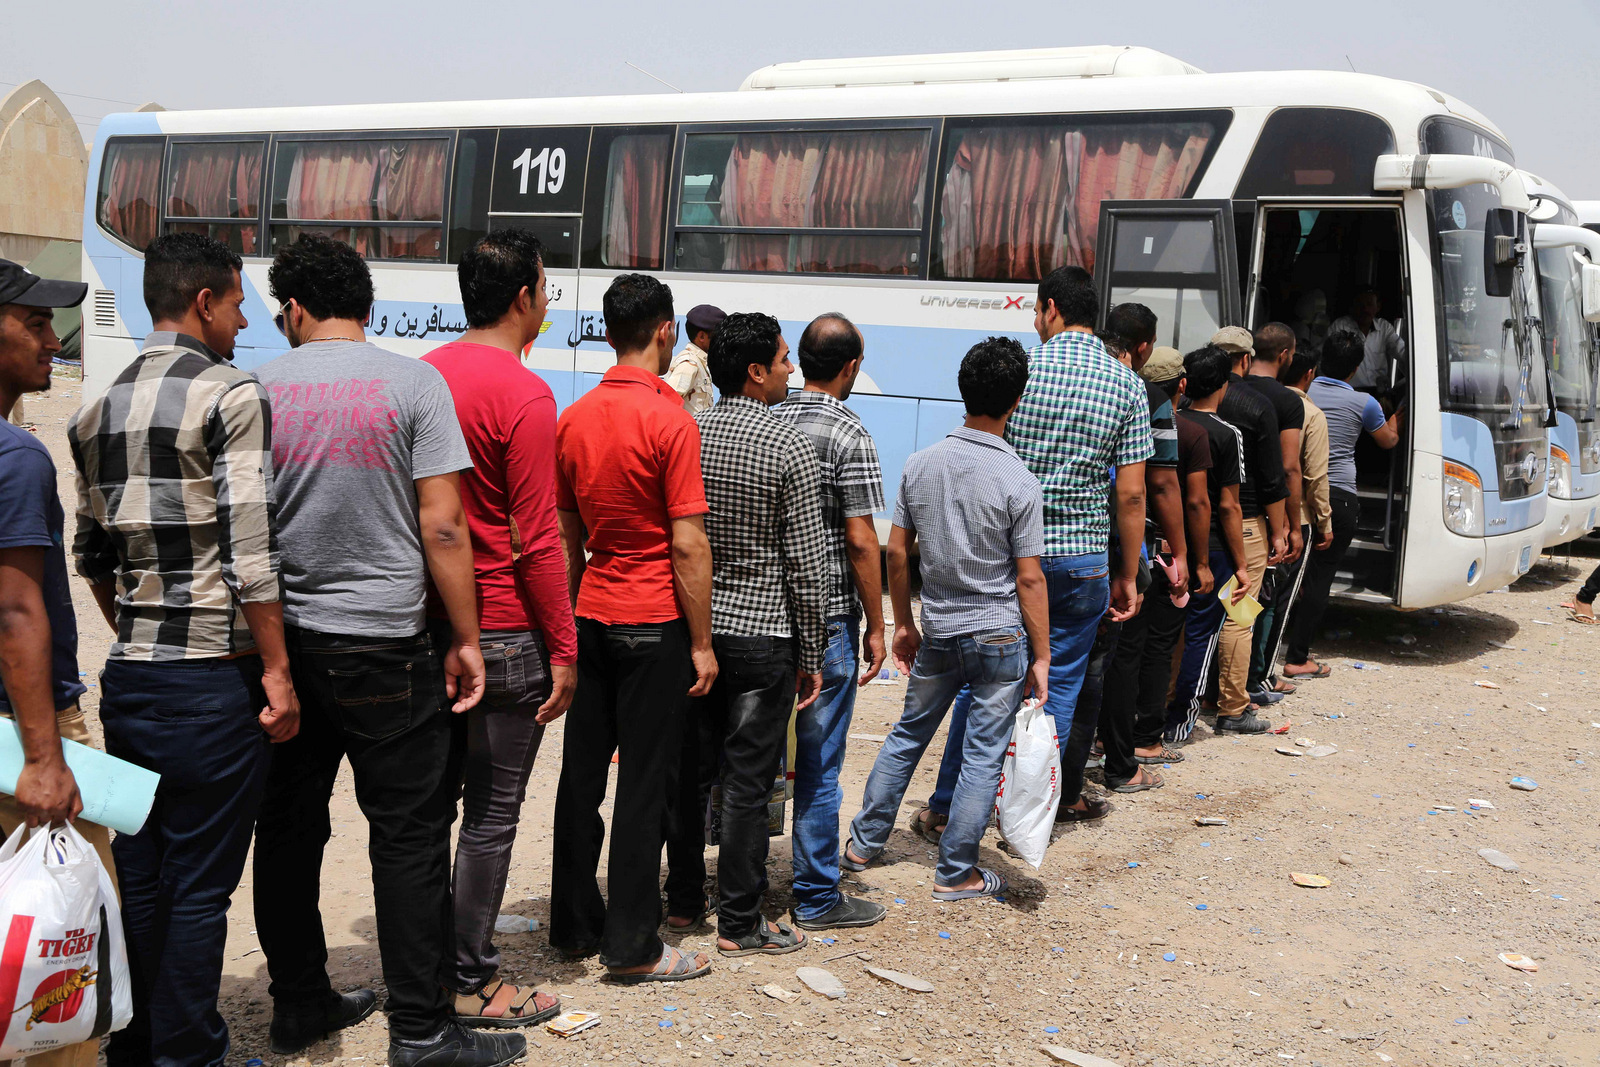 Iraqi men line up to board a bus at a recruiting center to volunteer with the popular mobilization units (Hashd al-Shaabi) to fight ISIS insurgents, Baghdad, Iraq, June 20, 2014. (AP/Karim Kadim)